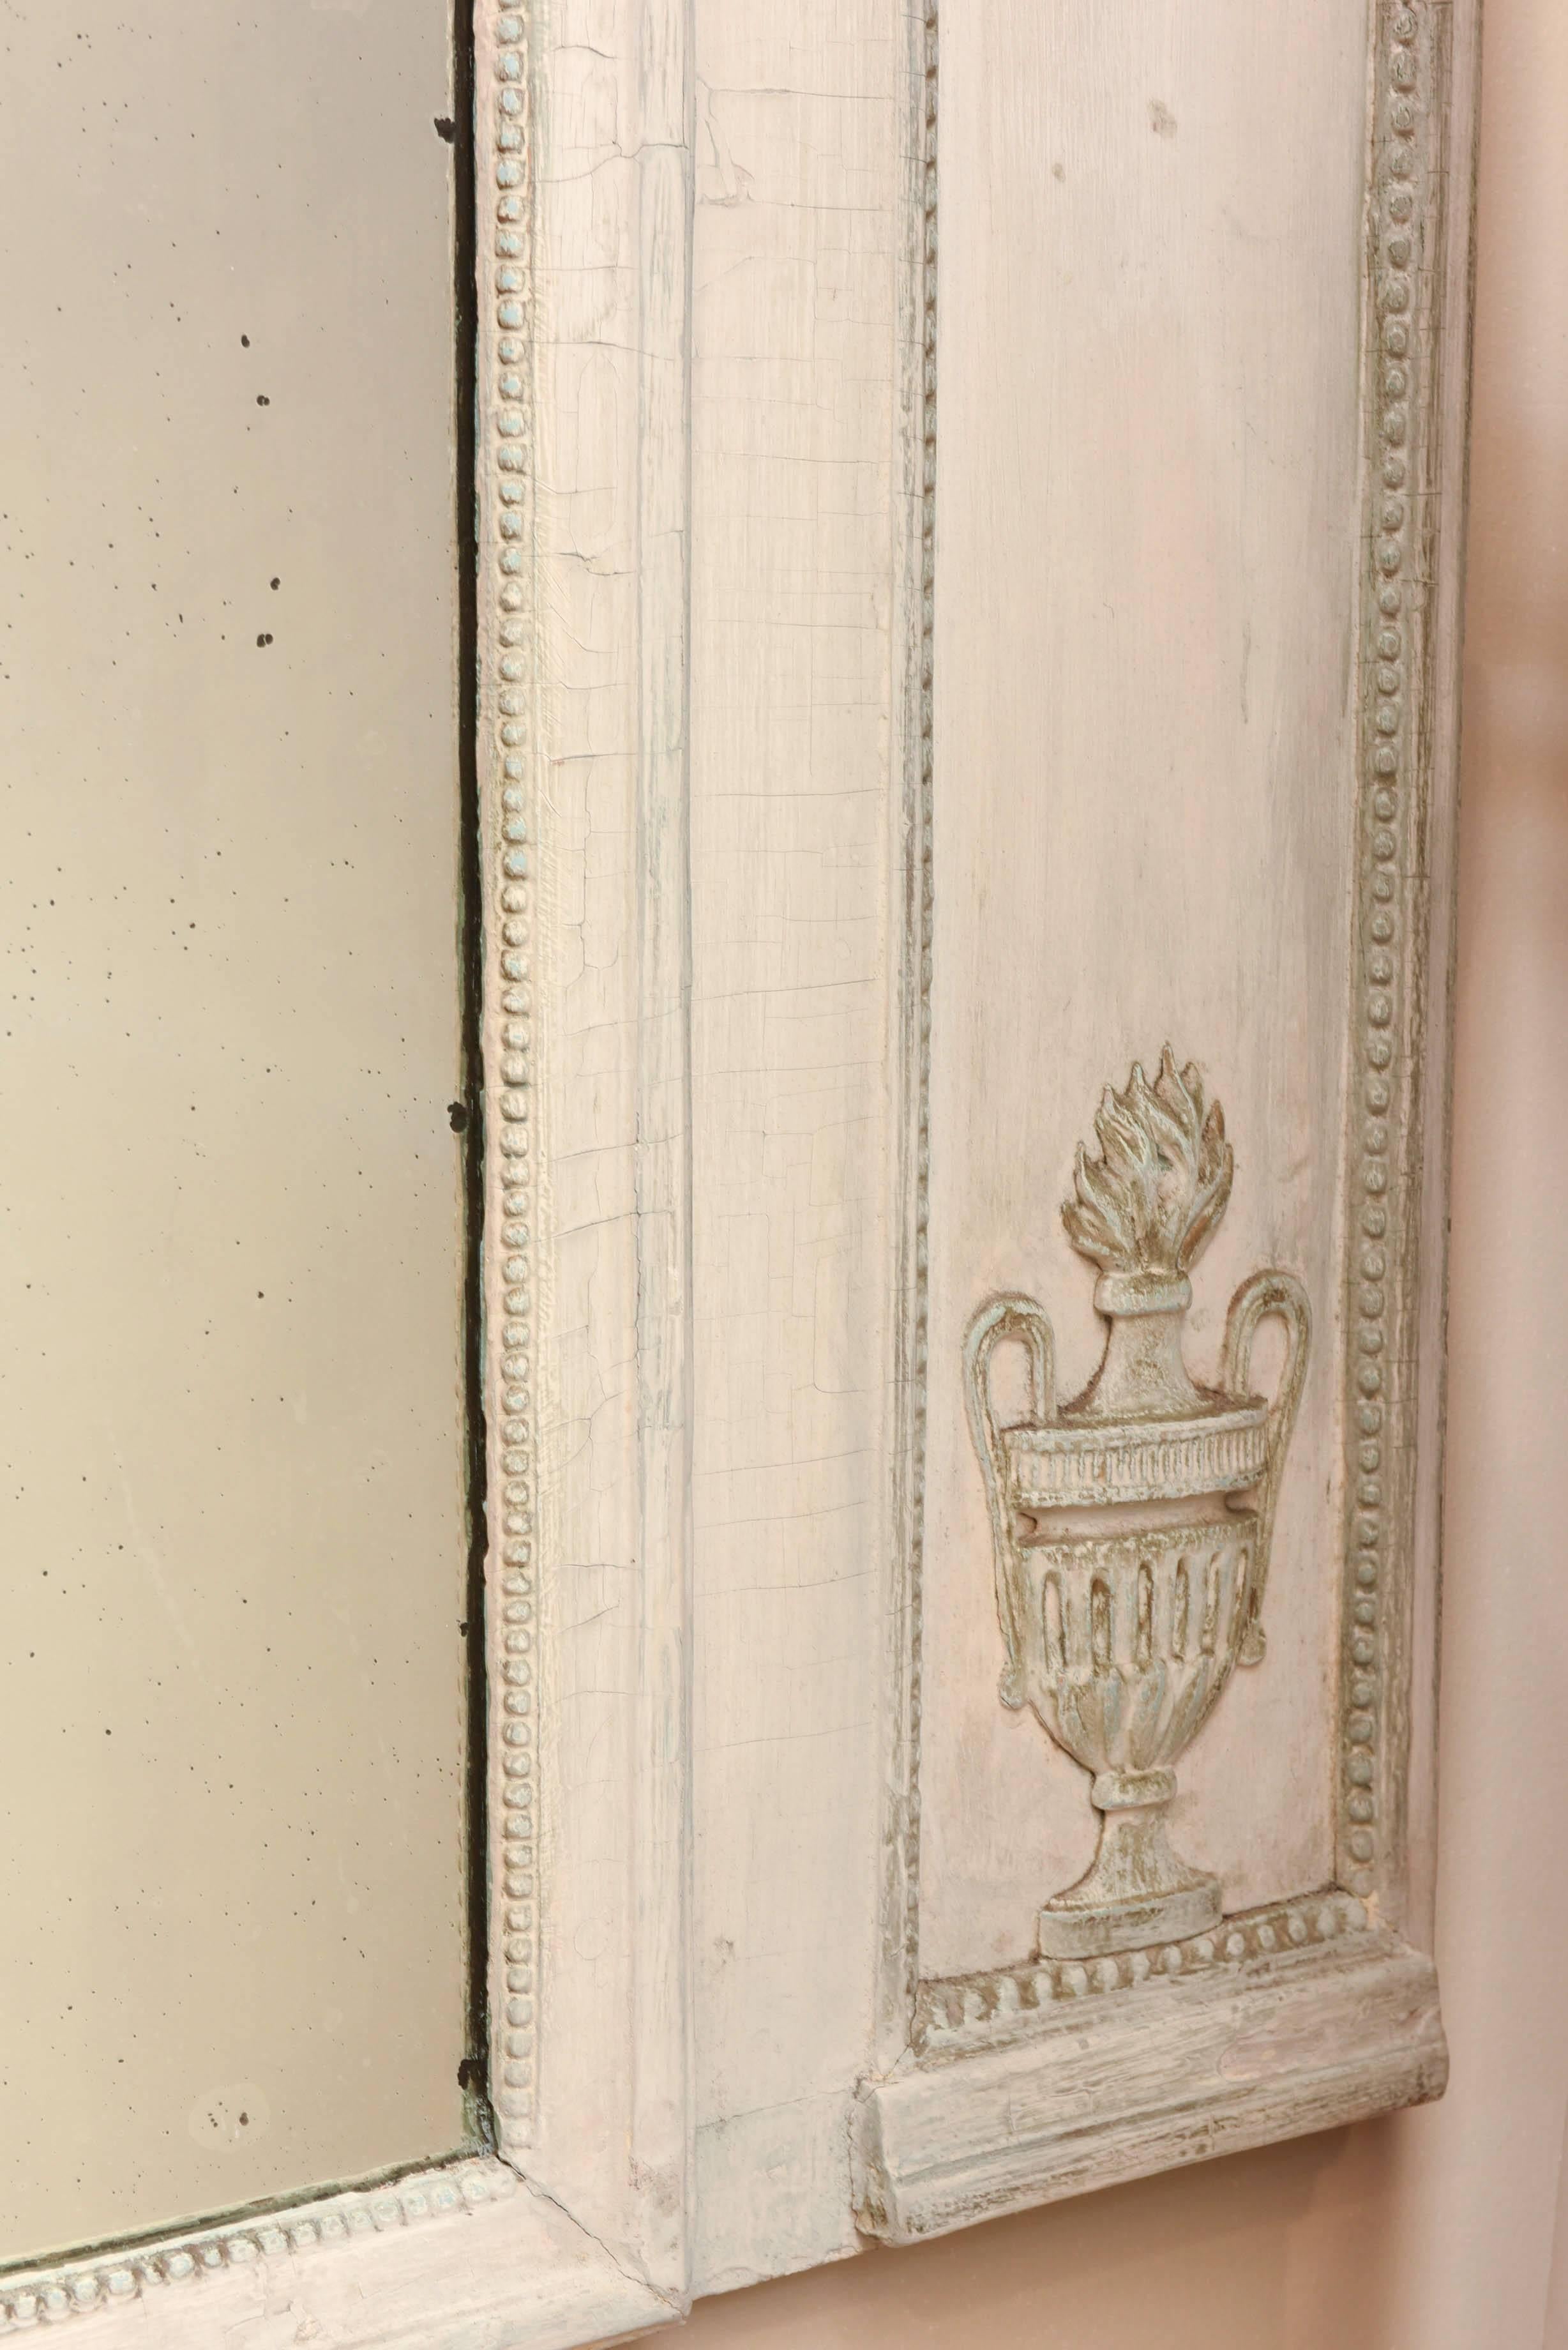 Trumeau mirror, having distressed painted finish, outcarved floral and urn motifs on side panels, centered with exquisitely carved raised basket of flowers separating two antique, spotted, diamond dust mirror panels, surmounted by molded cornice.